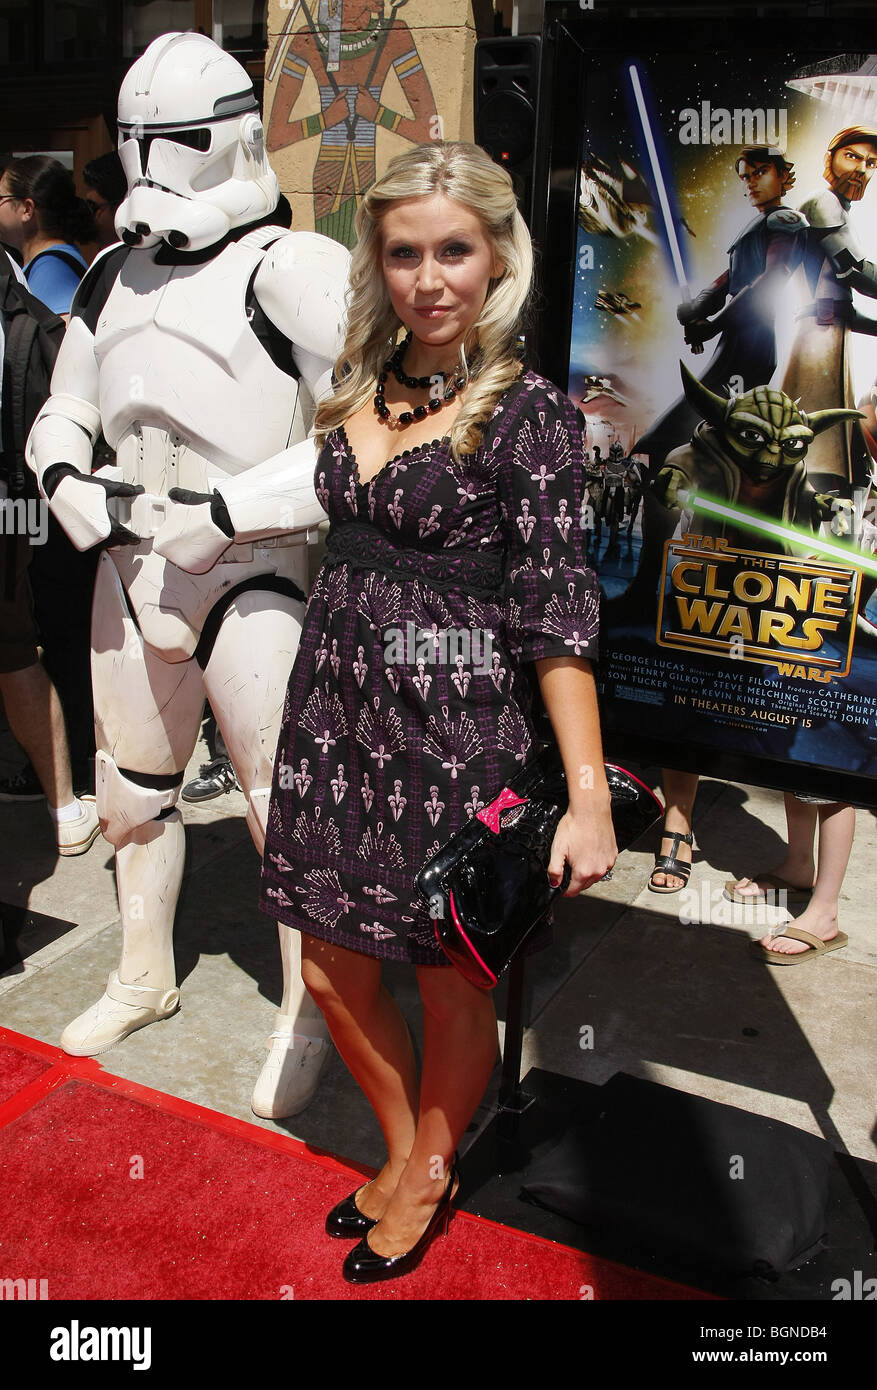 ASHLEY ECKSTEIN STAR WARS: THE CLONE WARS U.S. PREMIERE EGYPTIAN THEATRE  HOLLYWOOD LOS ANGELES USA 10 August 2008 Stock Photo